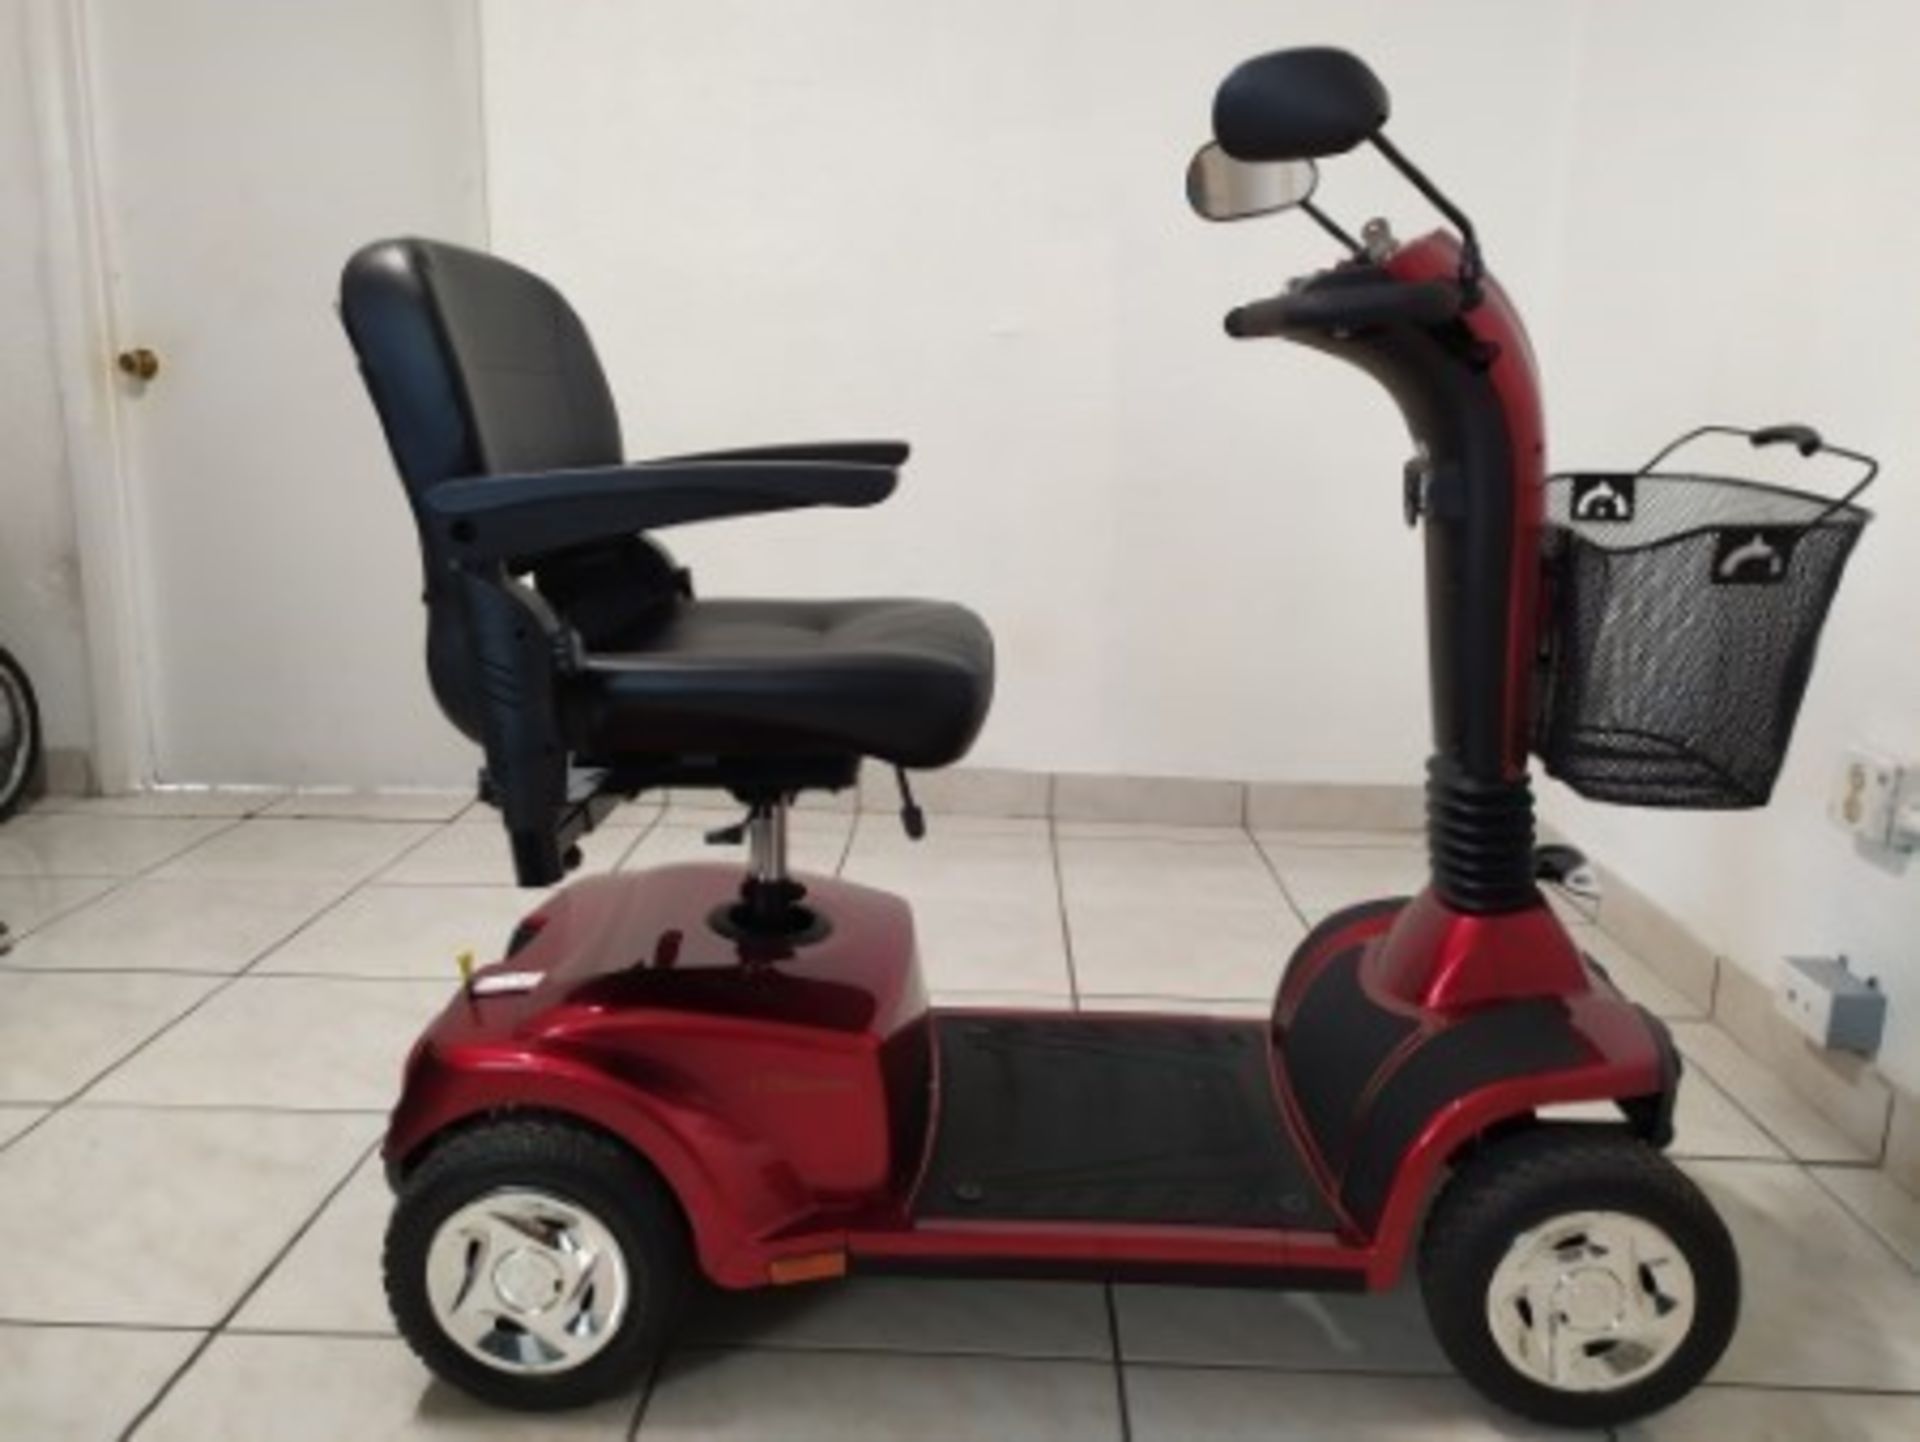 2016 GOLDEN COMPANION GC440 4-WHEEL SCOOTER WITH CHARGER & BASKET - RED - 400LB CAPACITY - SERIAL No - Image 6 of 6